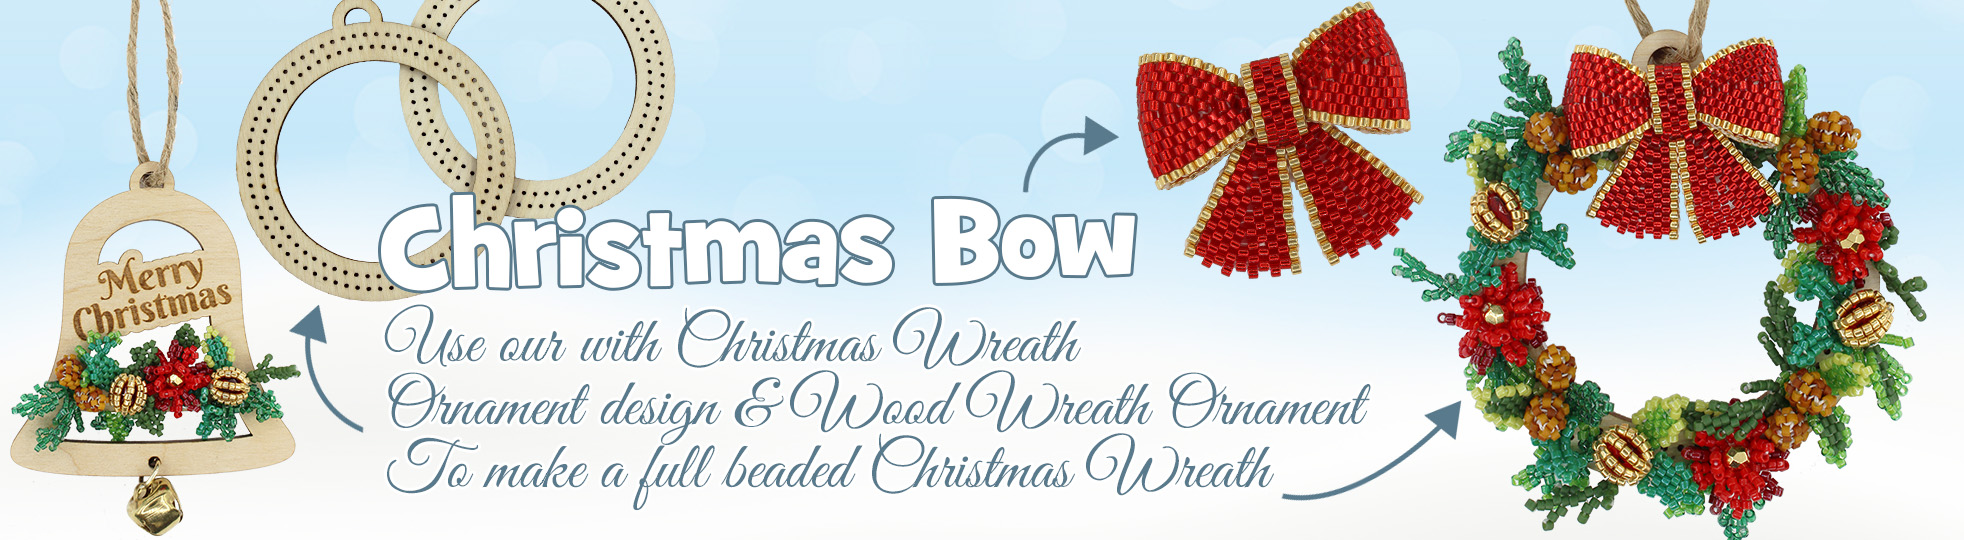 Christmas Bow for Wood Wreath Ornament Bead pattern